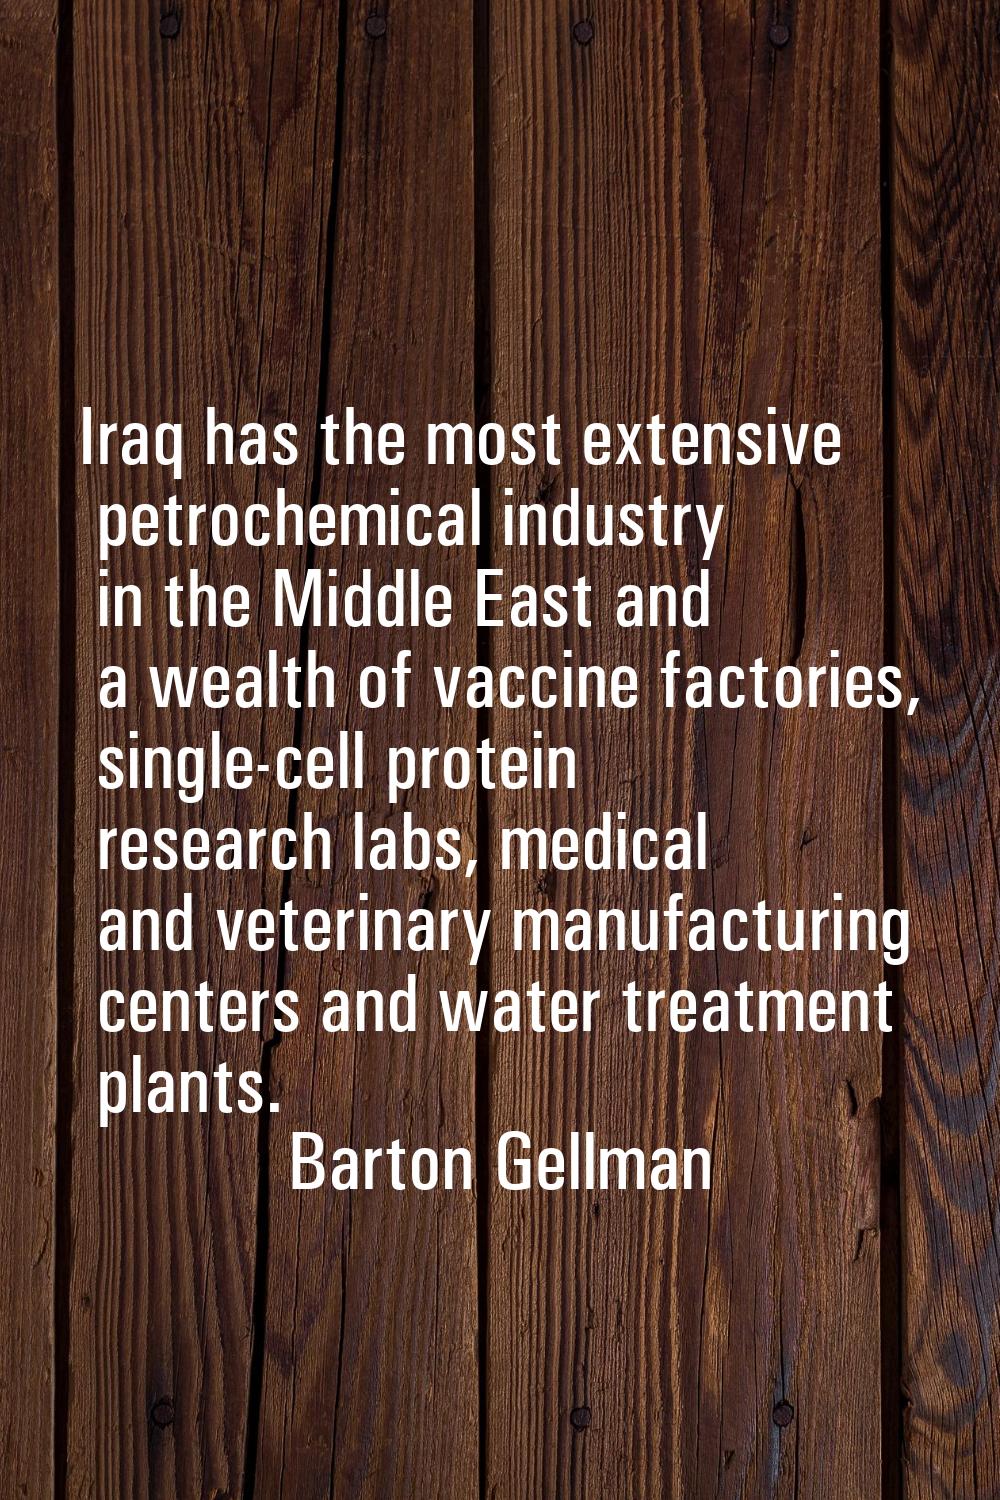 Iraq has the most extensive petrochemical industry in the Middle East and a wealth of vaccine facto